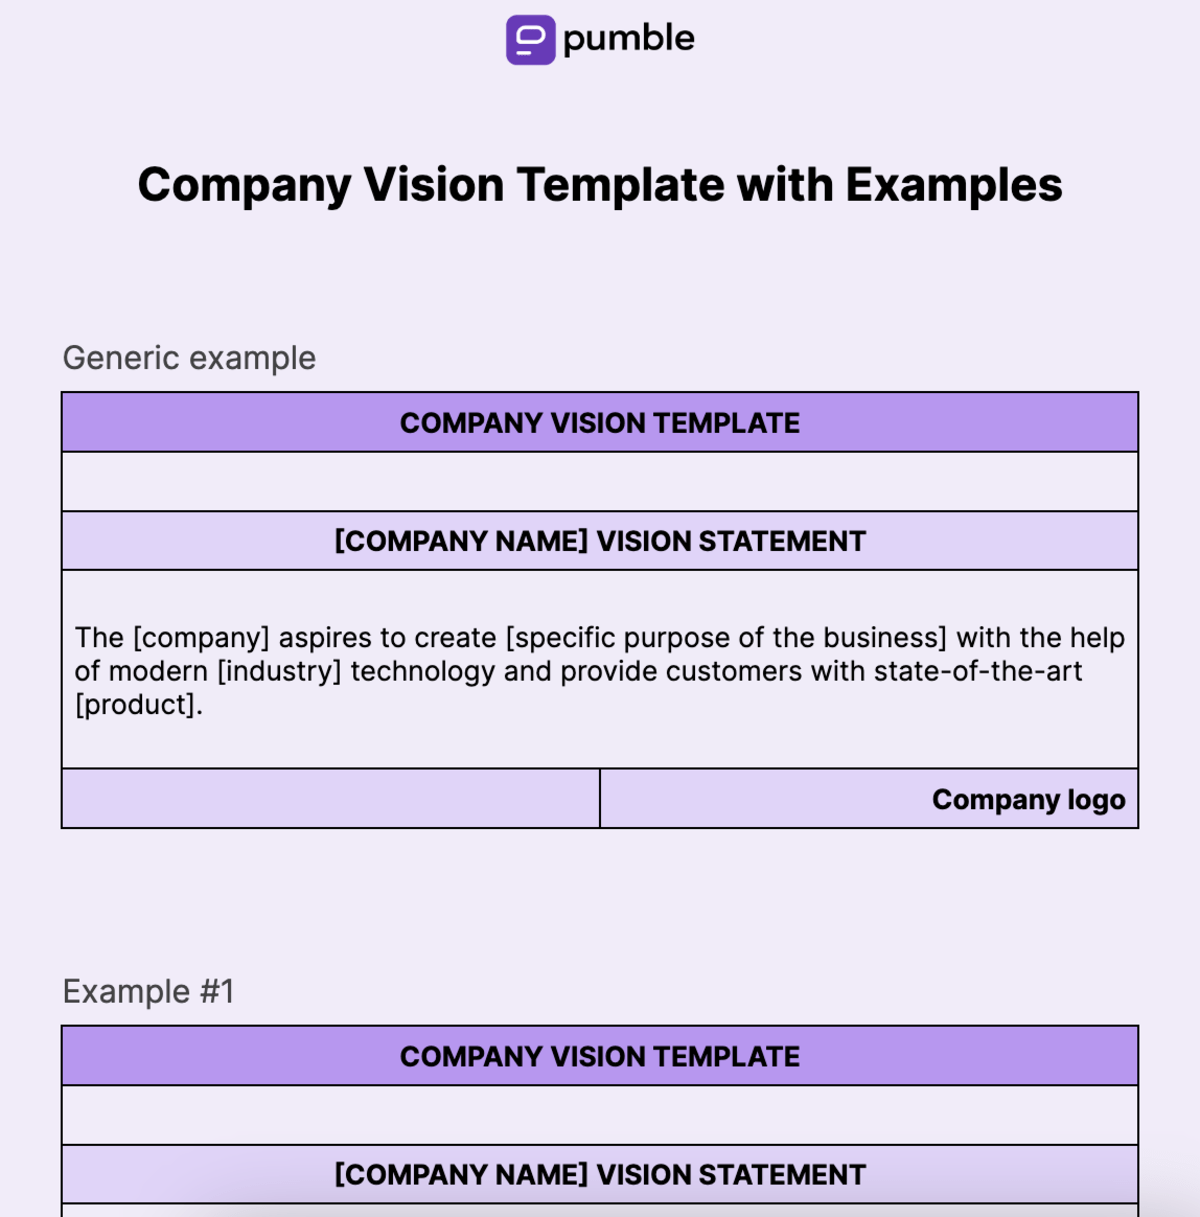 Company Vision Template with Examples